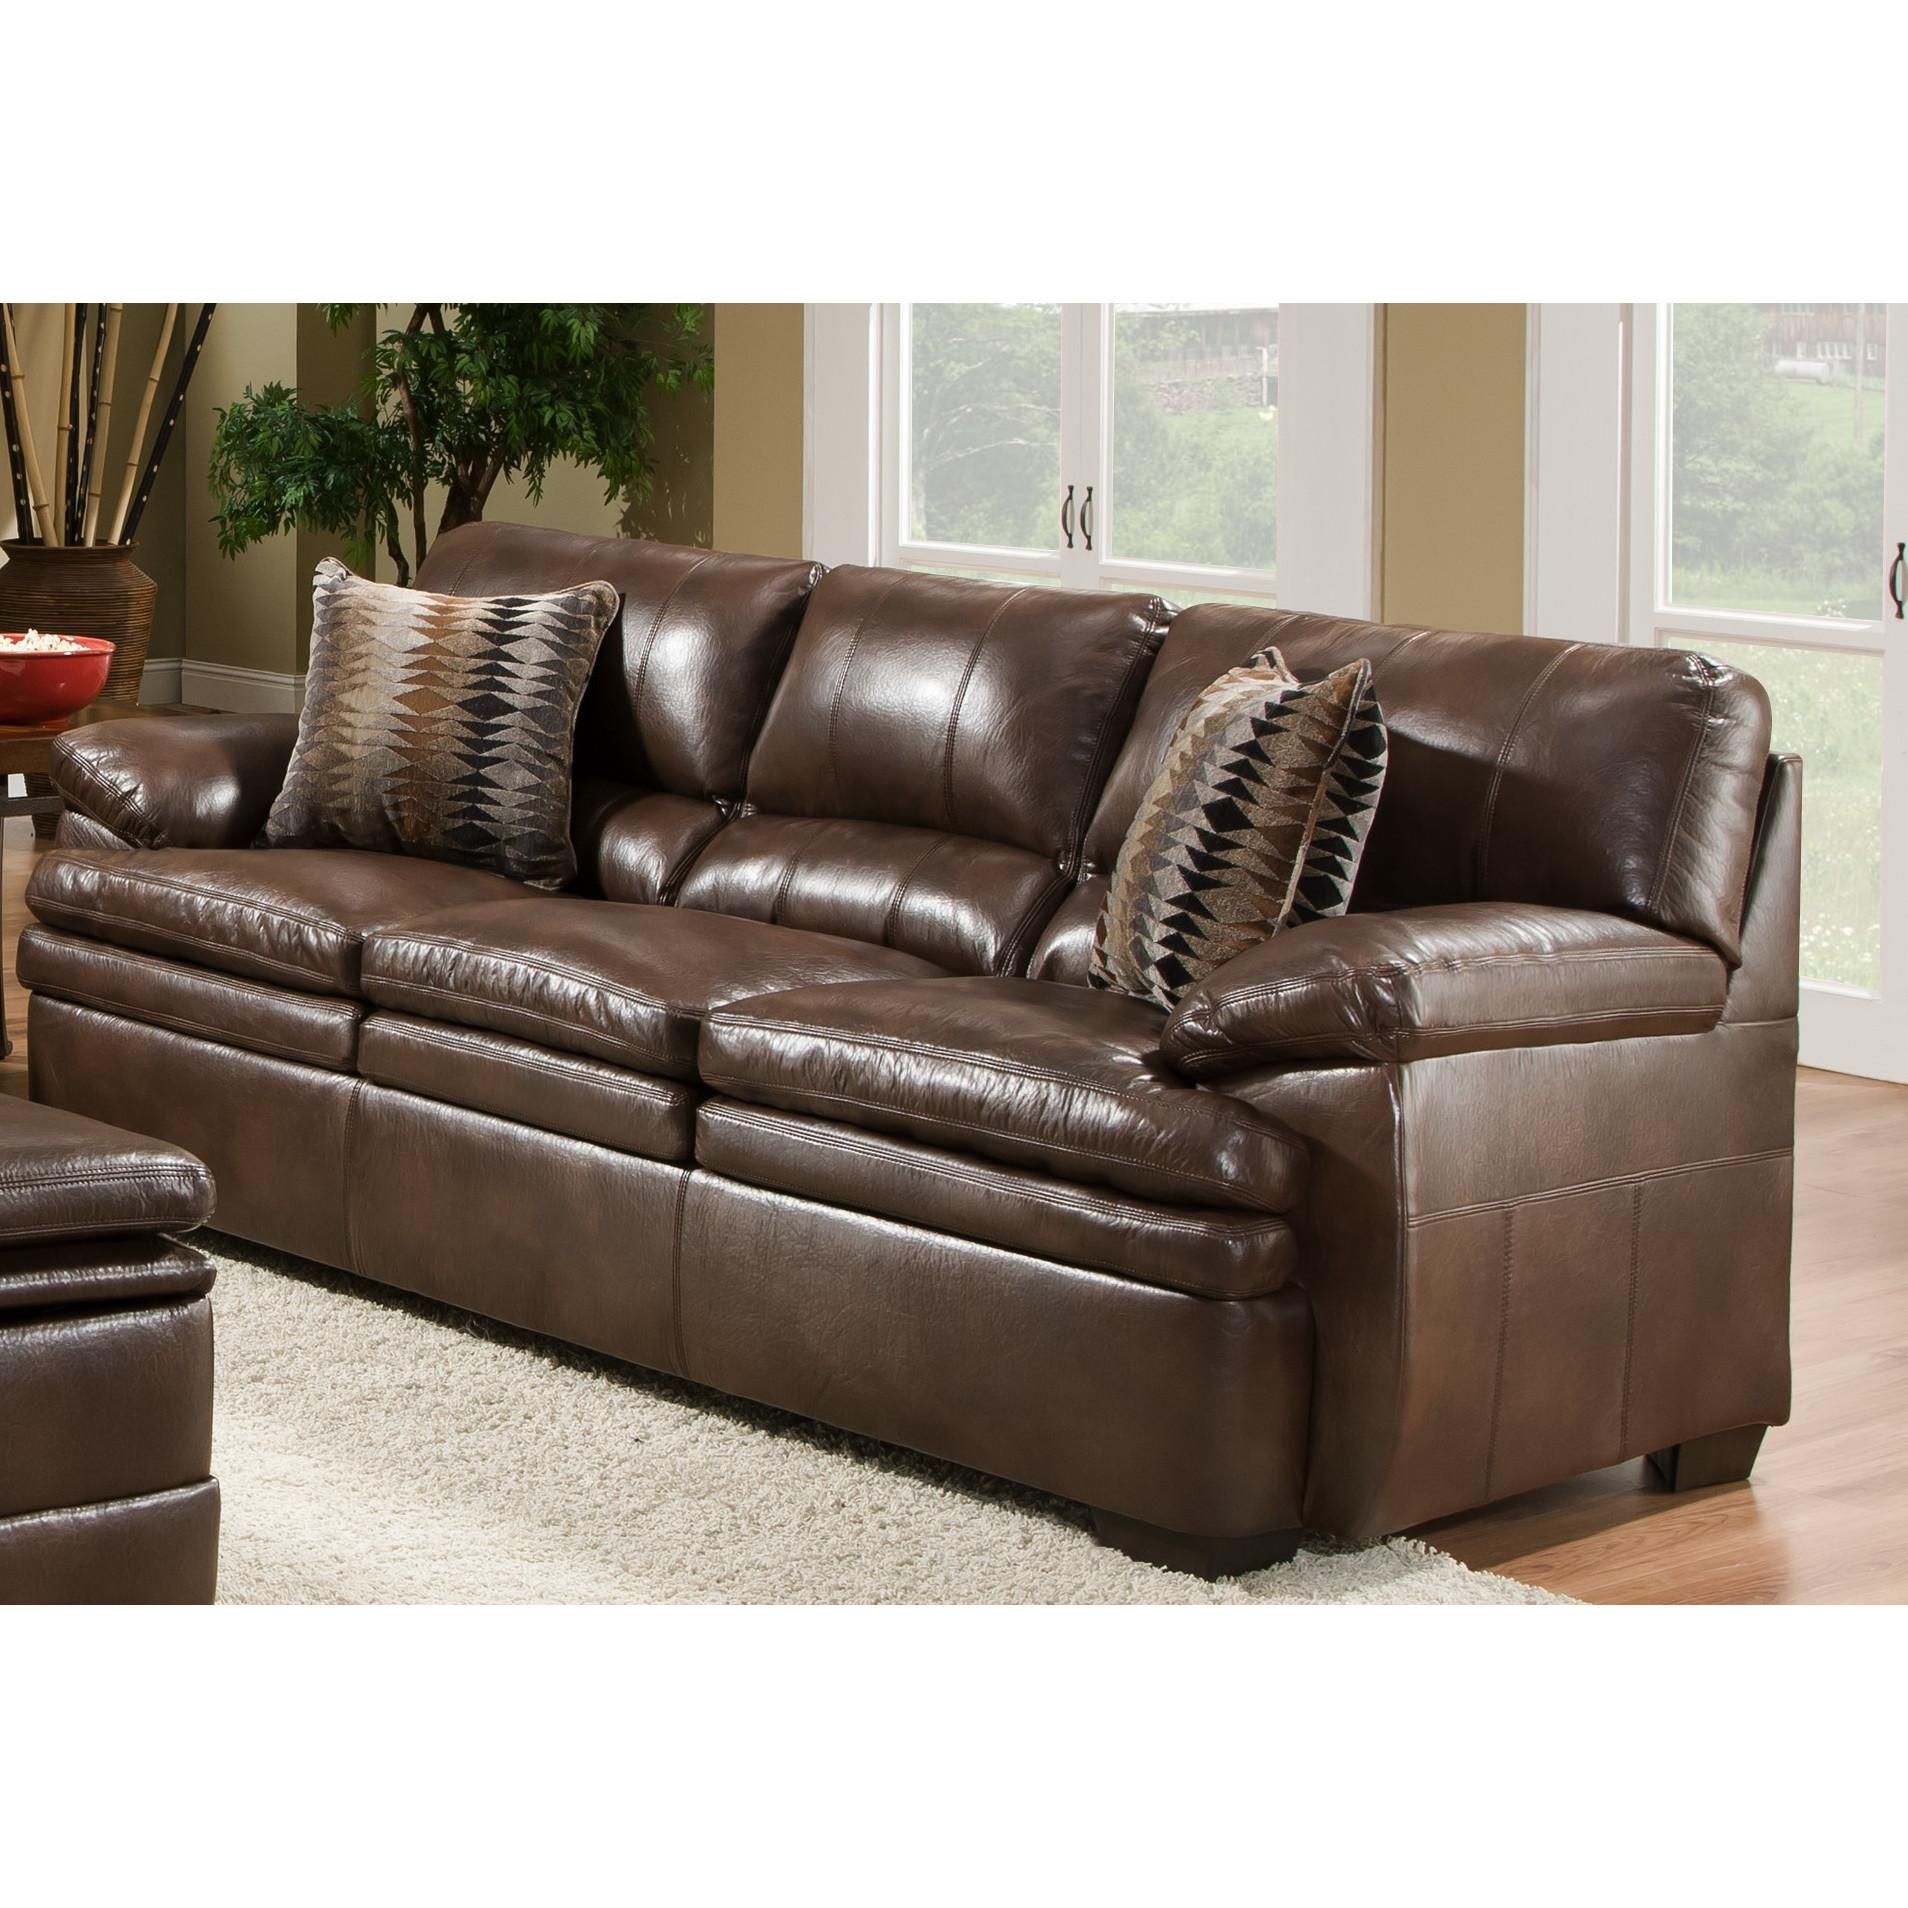 Simmons Leather Sofa With Inspiration Hd Pictures 7276 | Kengire Inside Simmons Leather Sofas And Loveseats (View 18 of 20)